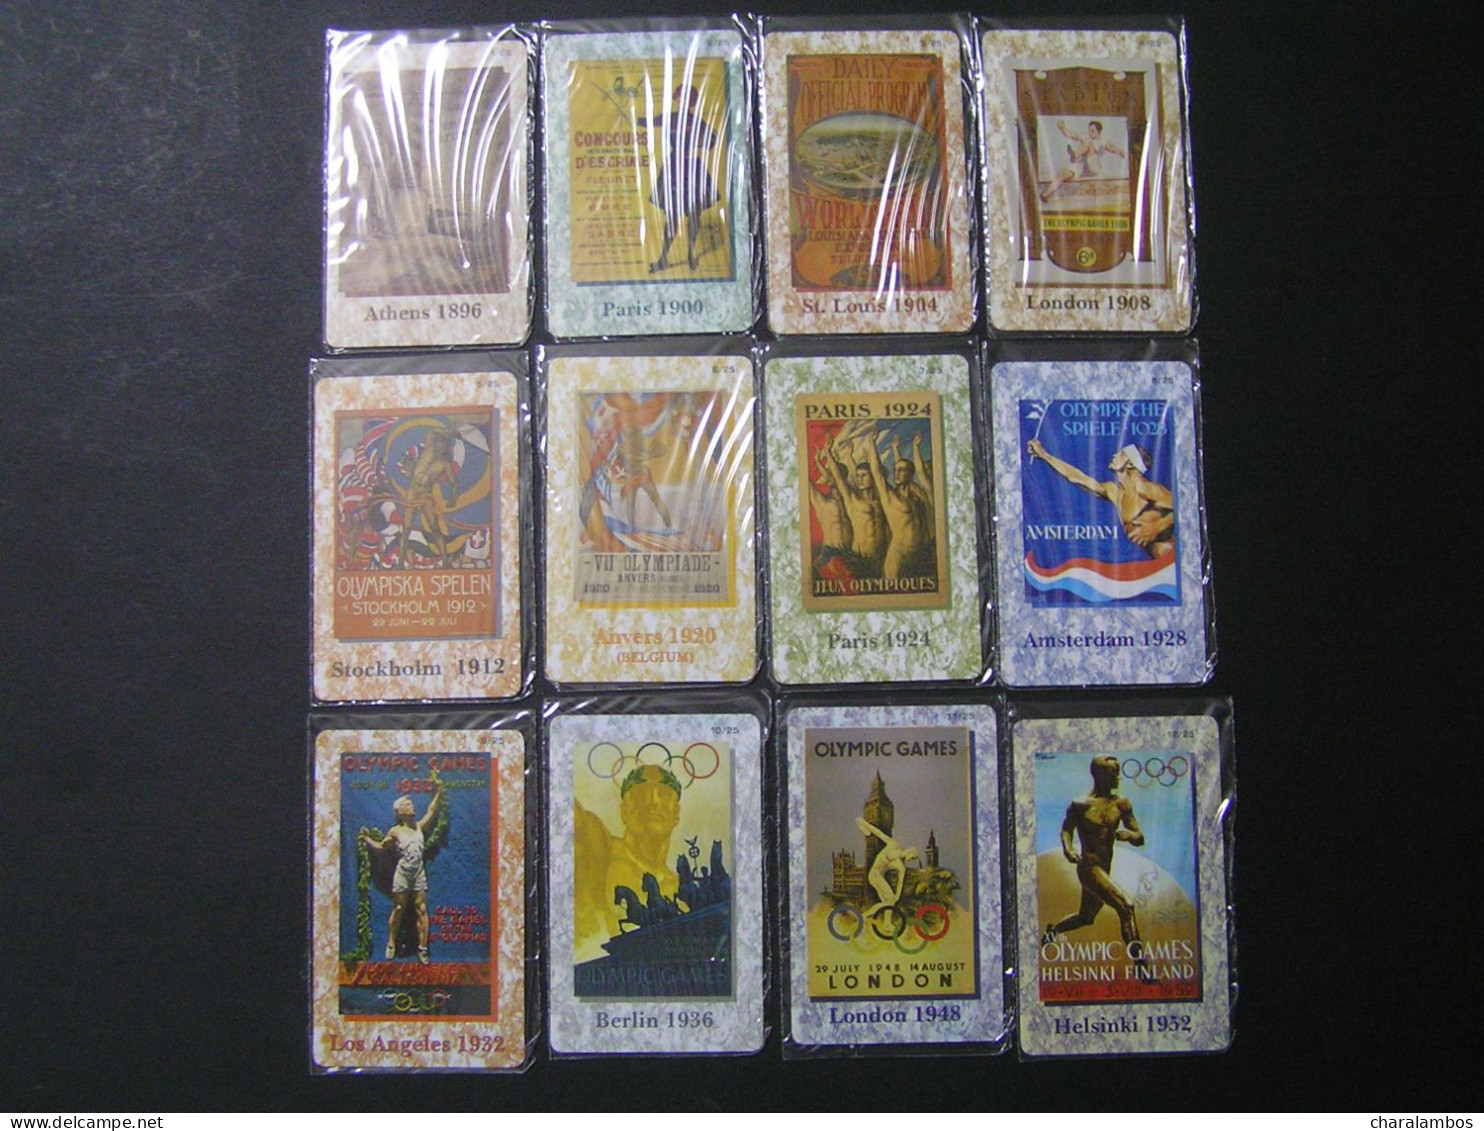 GREECE OLYMPIADS 1896-2004 25 Collectors Telephone Cards DVD ANCIENT OLYMPIA Birthplace Of The Olympic Games Folder Mind - Olympic Games